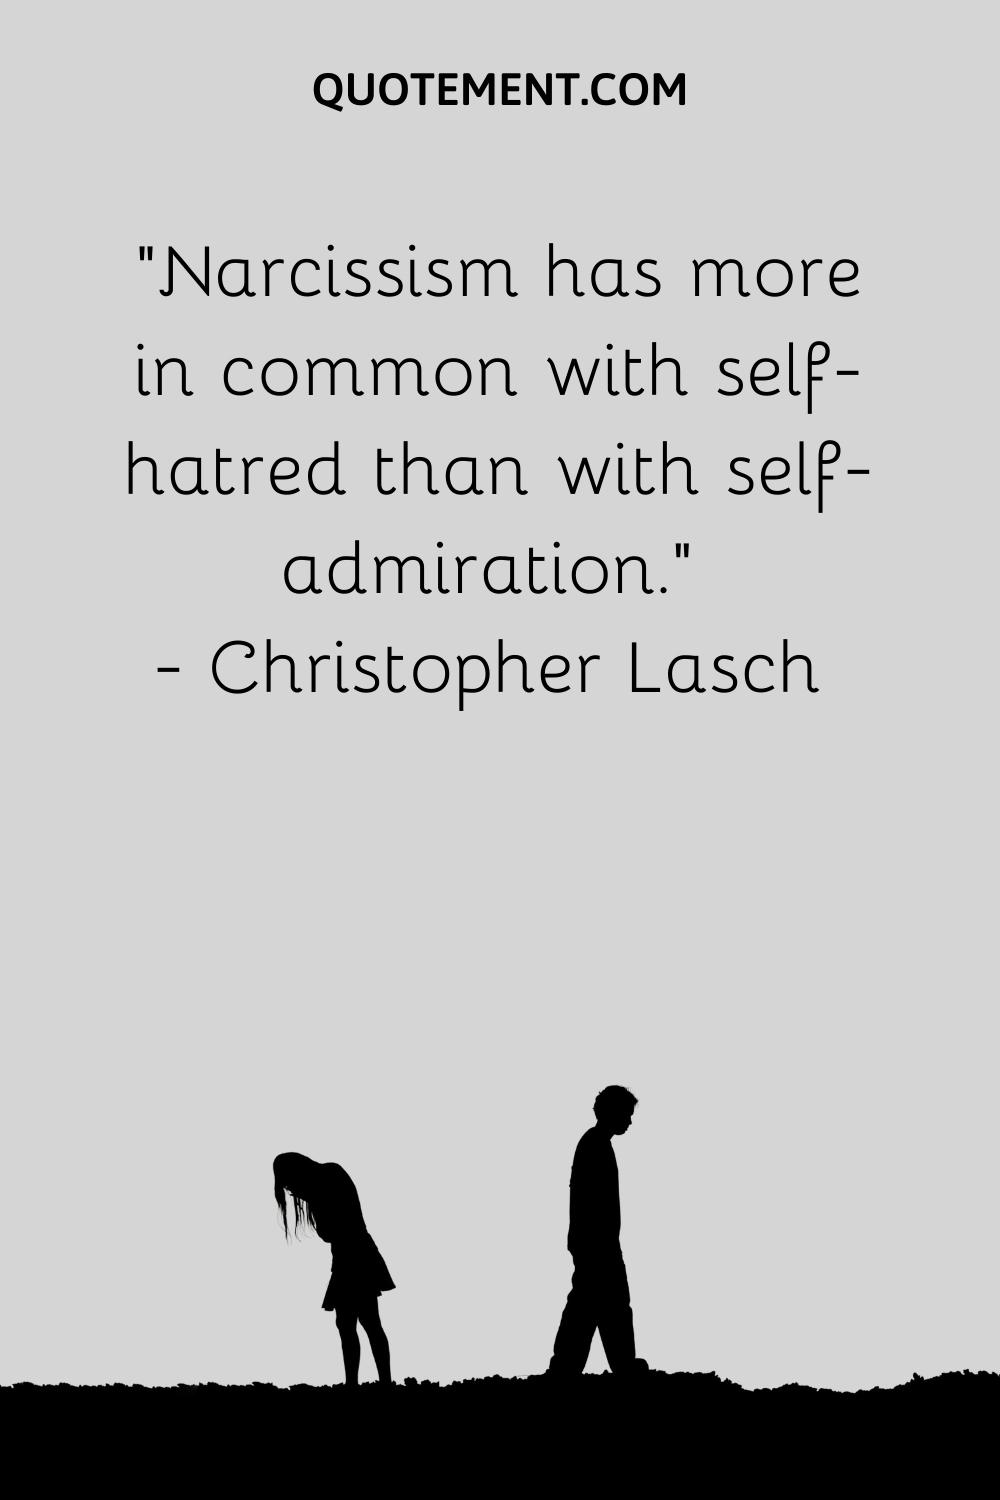 Narcissism has more in common with self-hatred than with self-admiration